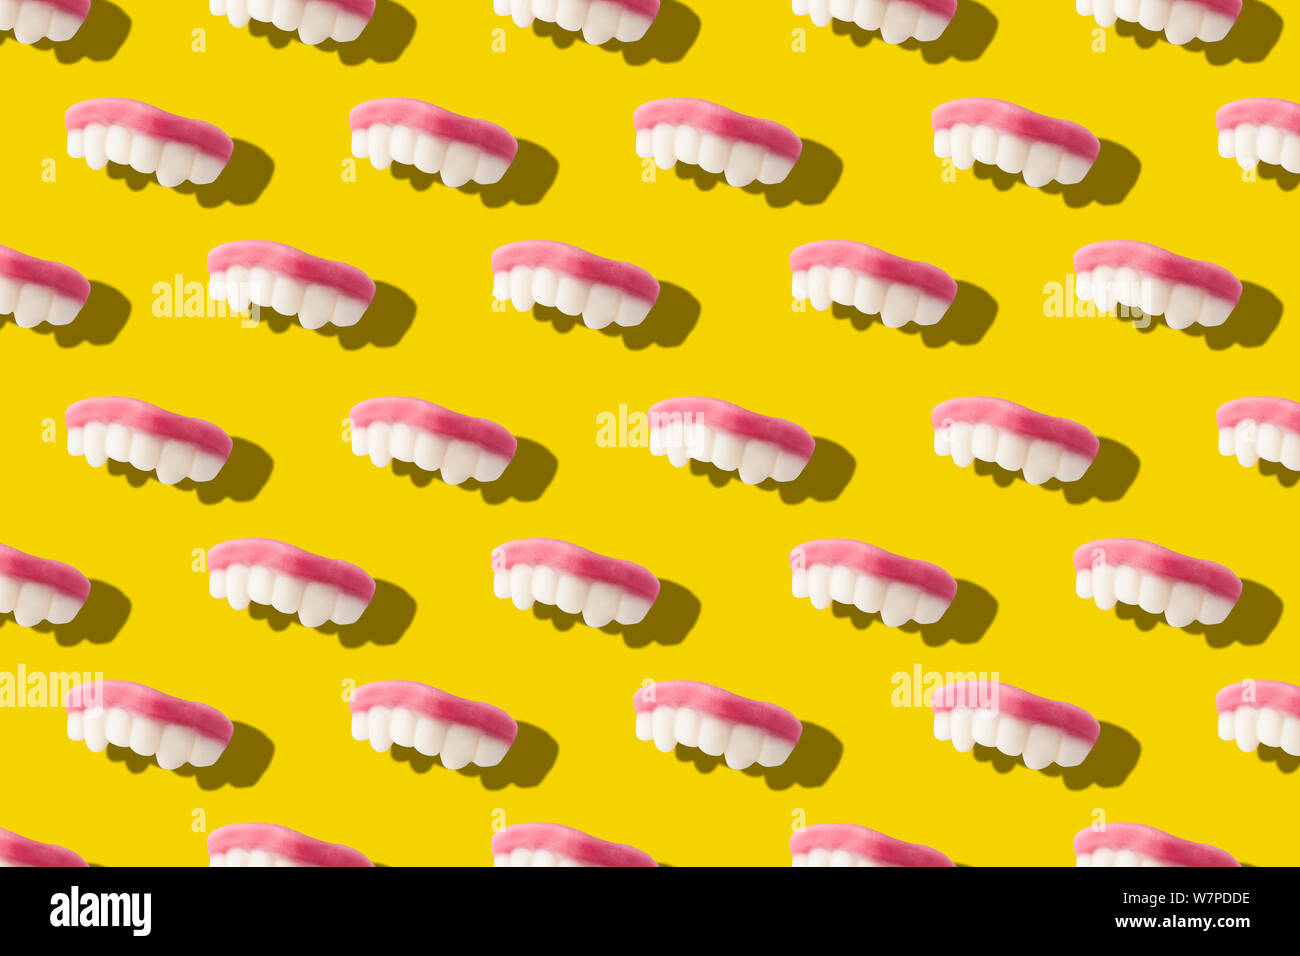 Photography collage of gummy milk teeth or jelly candies on bold yellow background top view flat lay isometric seamless pattern.Funny children's treat Stock Photo